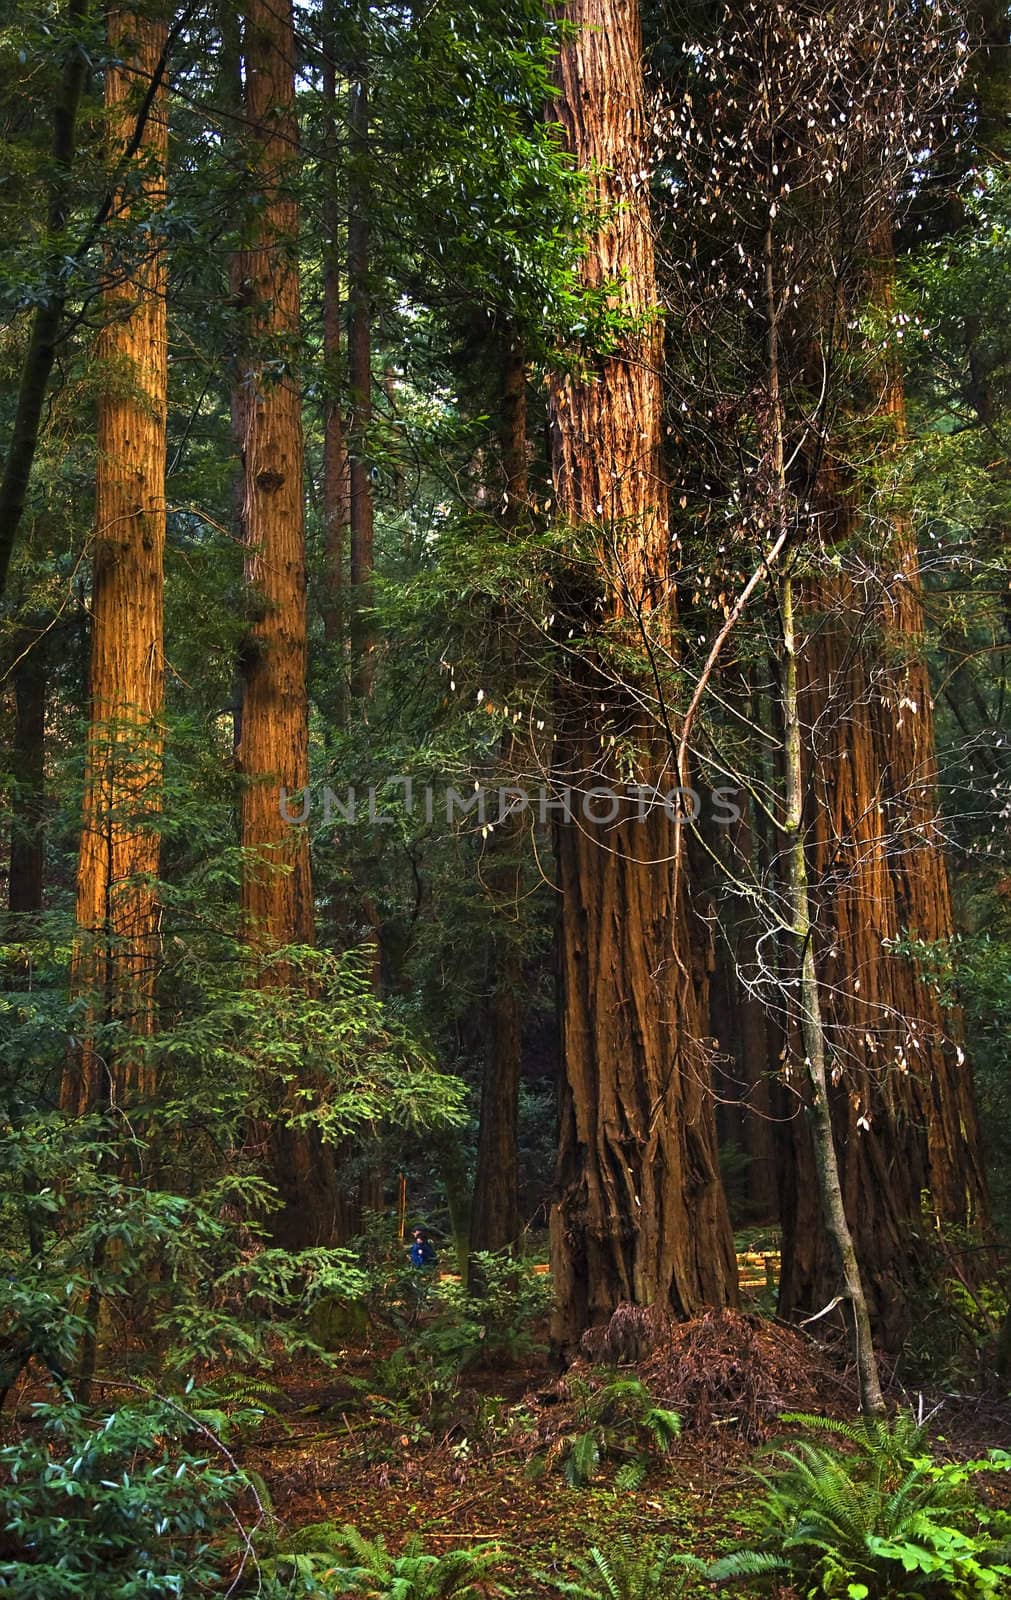 Giant Redwood Trees Tower Over Hikers Muir Woods National Monume by bill_perry